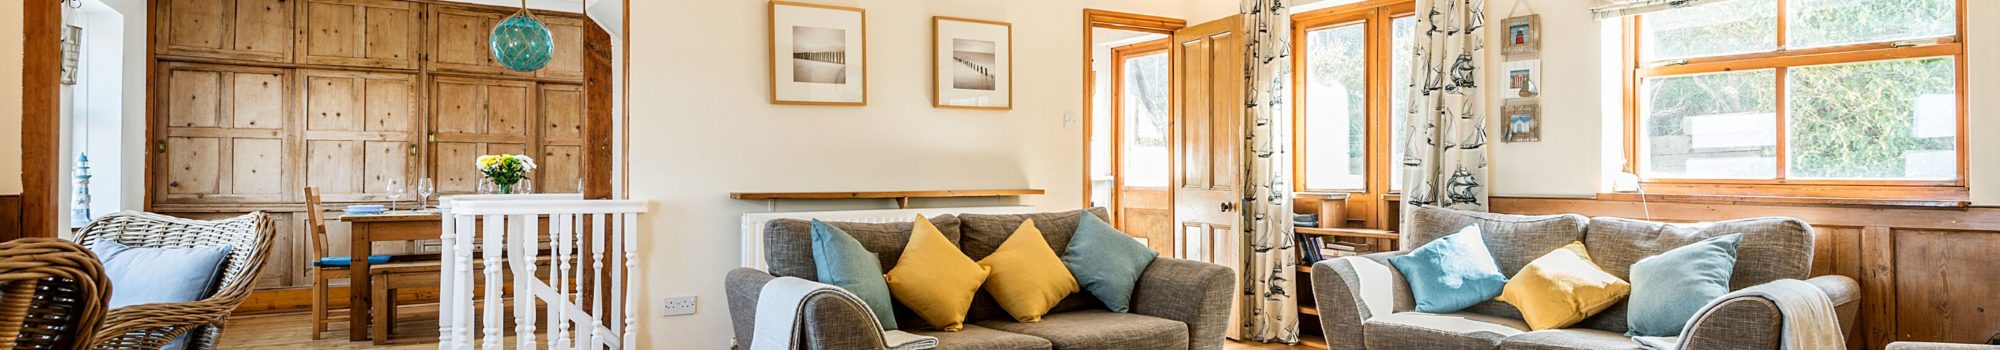 Dog friendly holiday cottage in Whitby